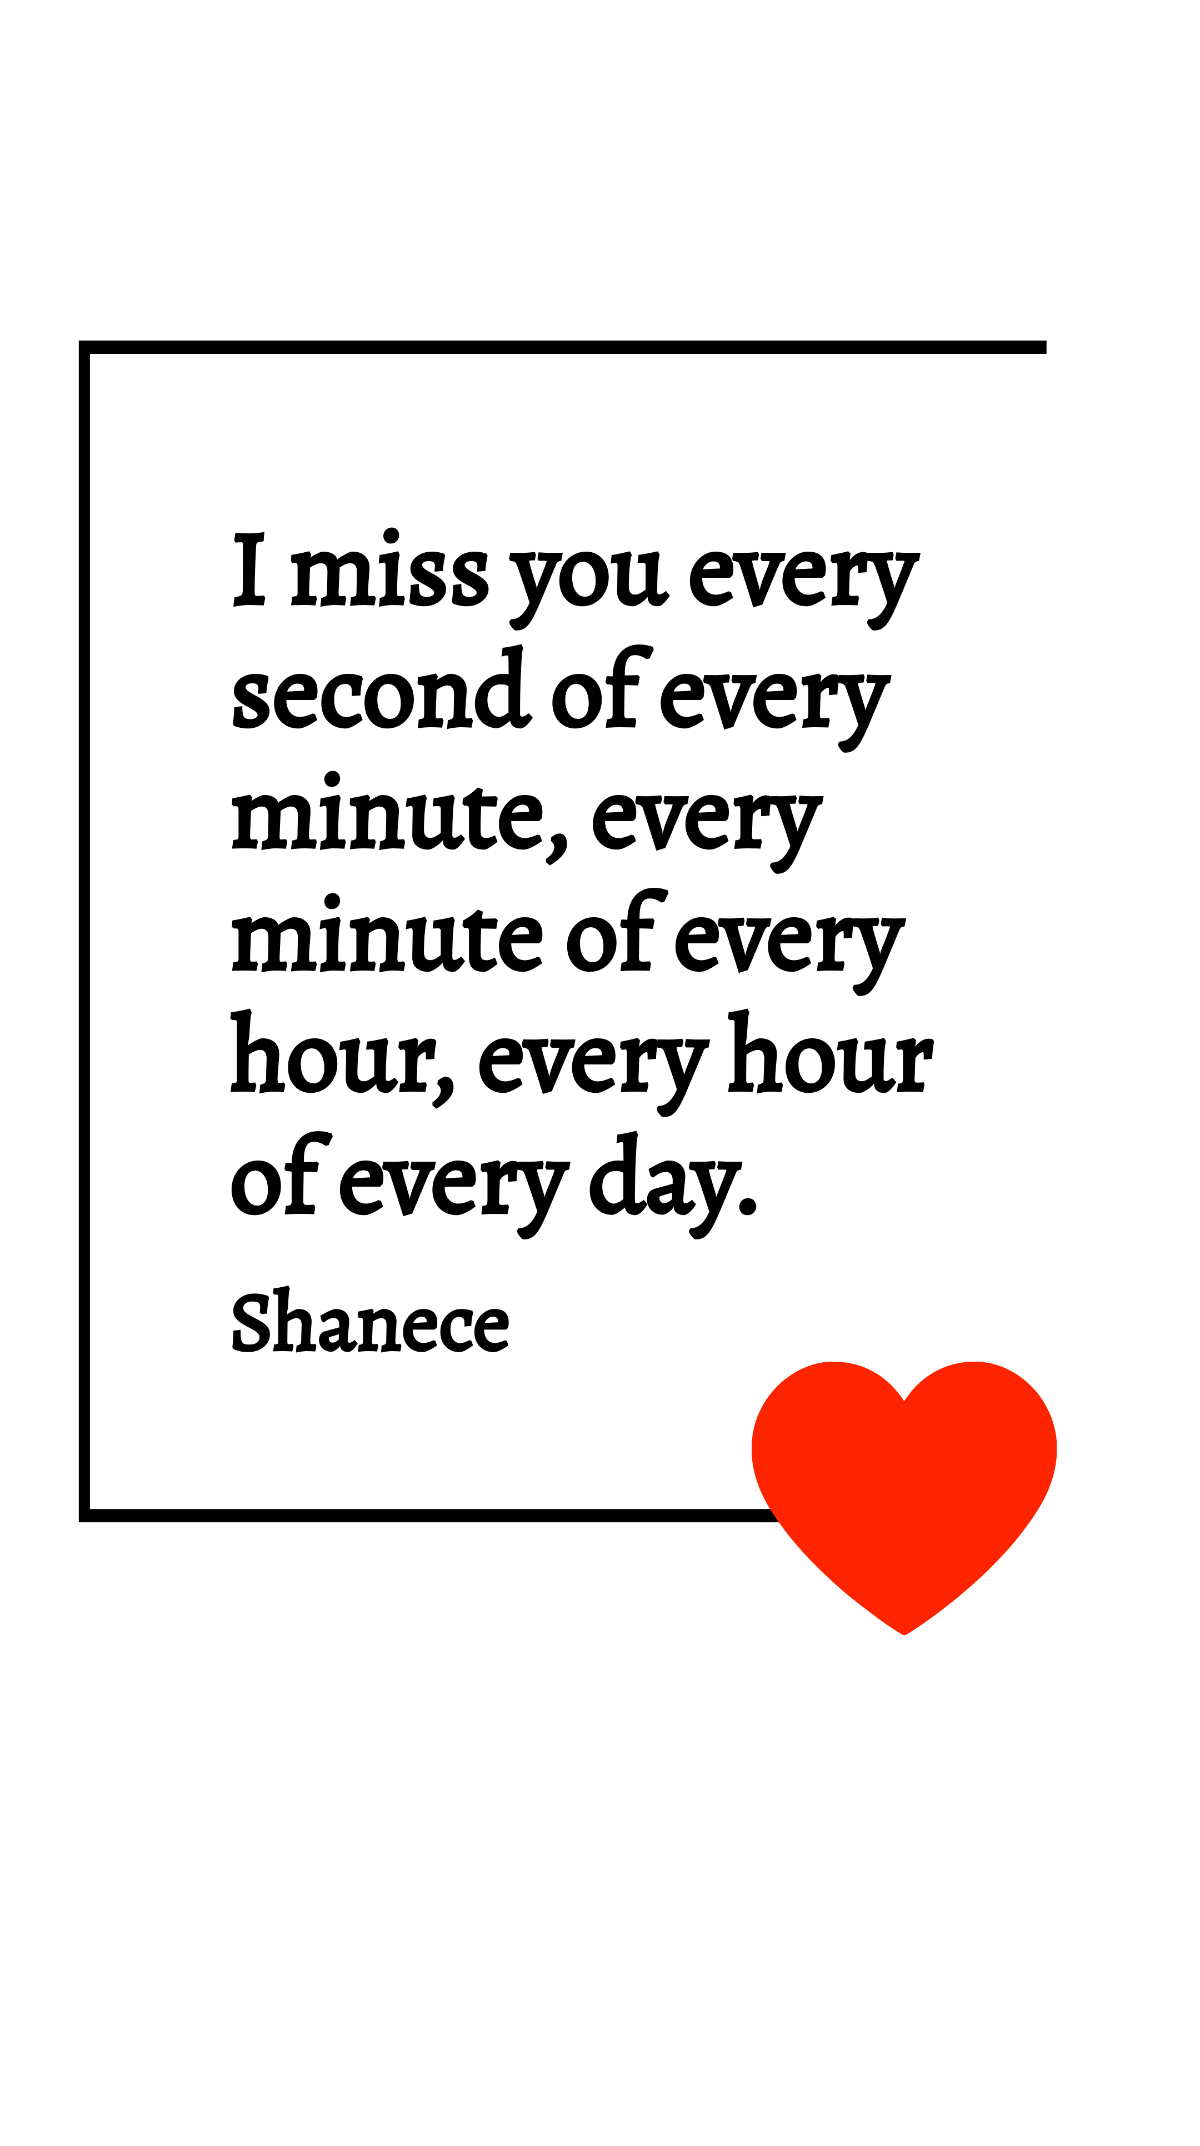 Shanece - I miss you every second of every minute, every minute of every hour, every hour of every day. Template